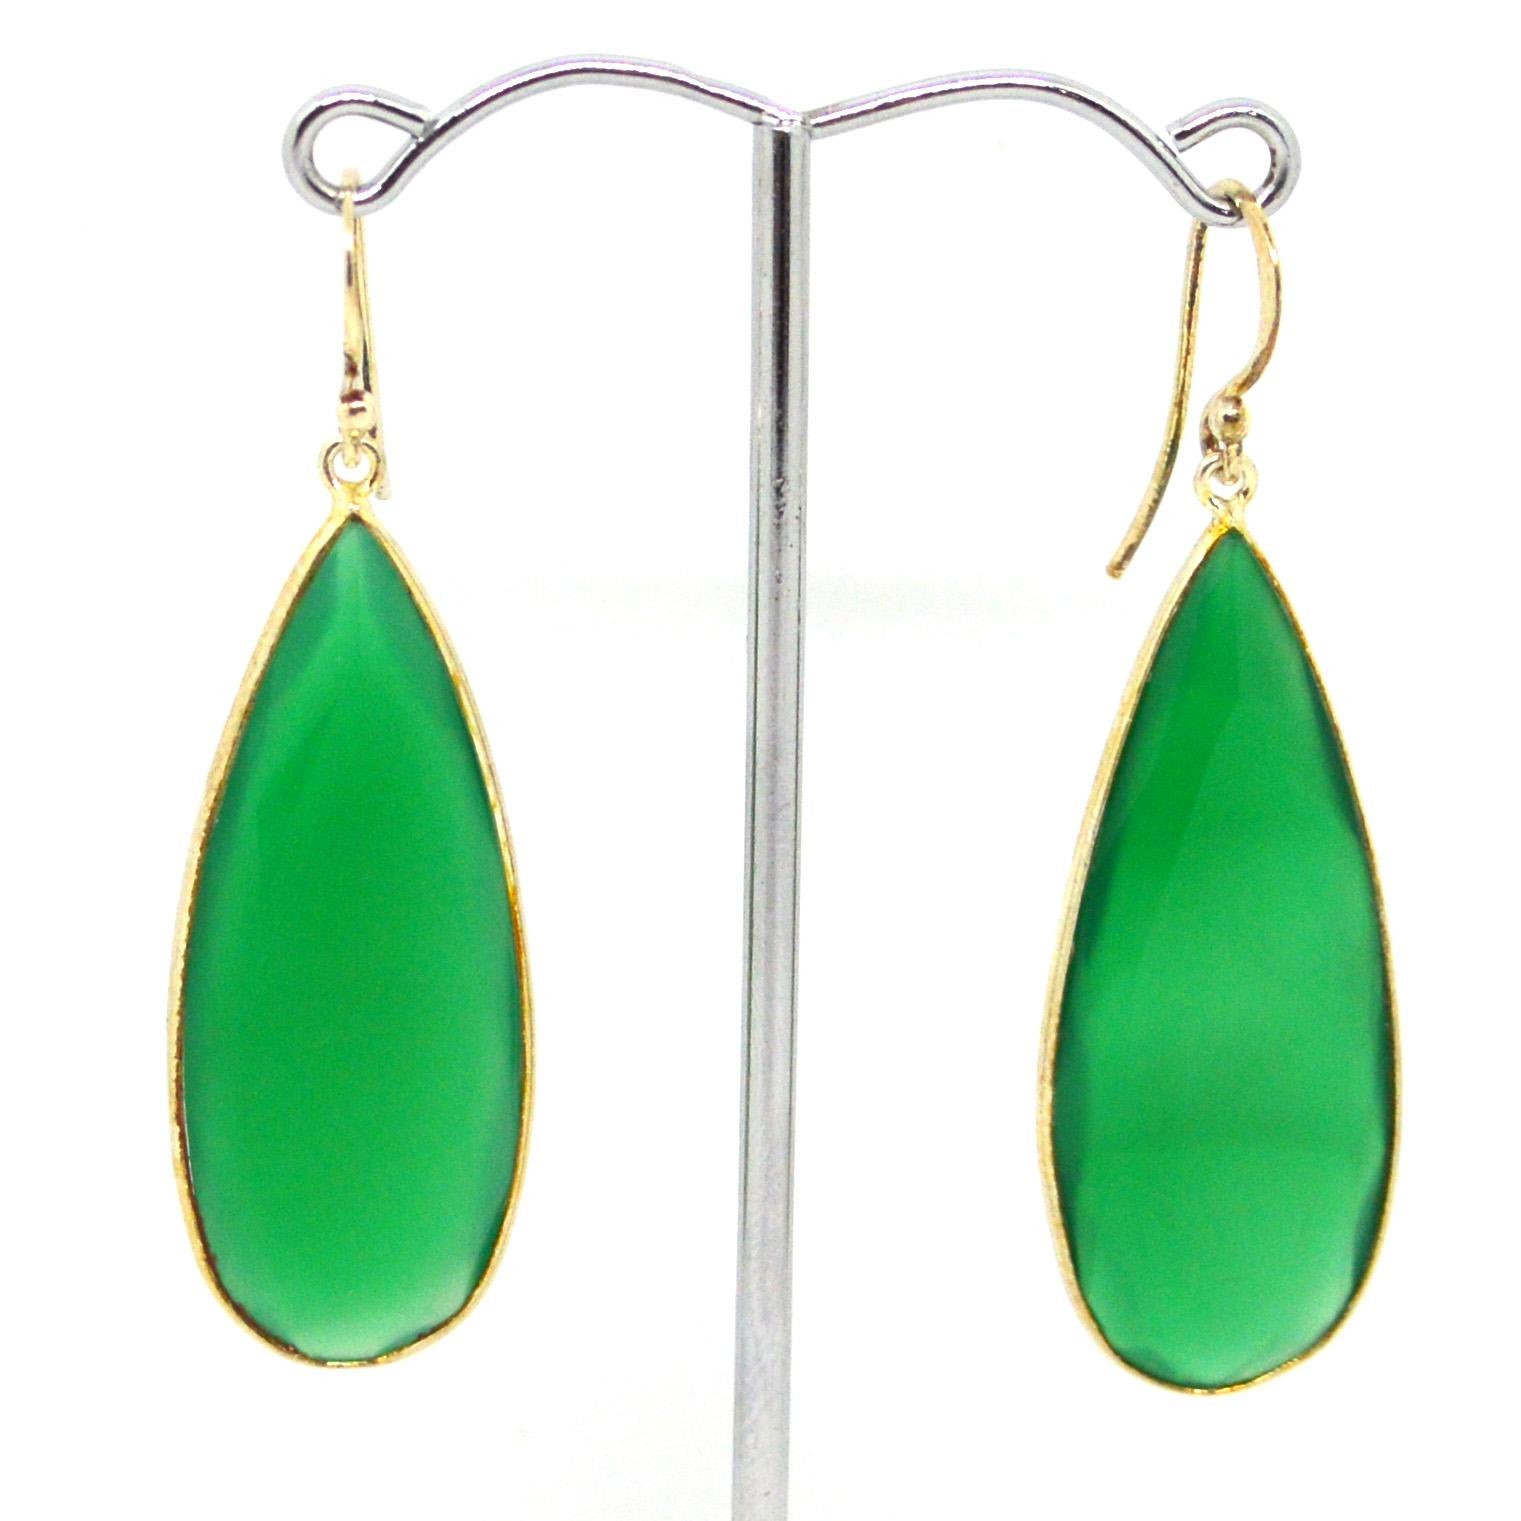 Large Green Onyx Faceted drops bezel set with Sterling Silver on a Sterling silver hook

Total Earring length 57mm.
